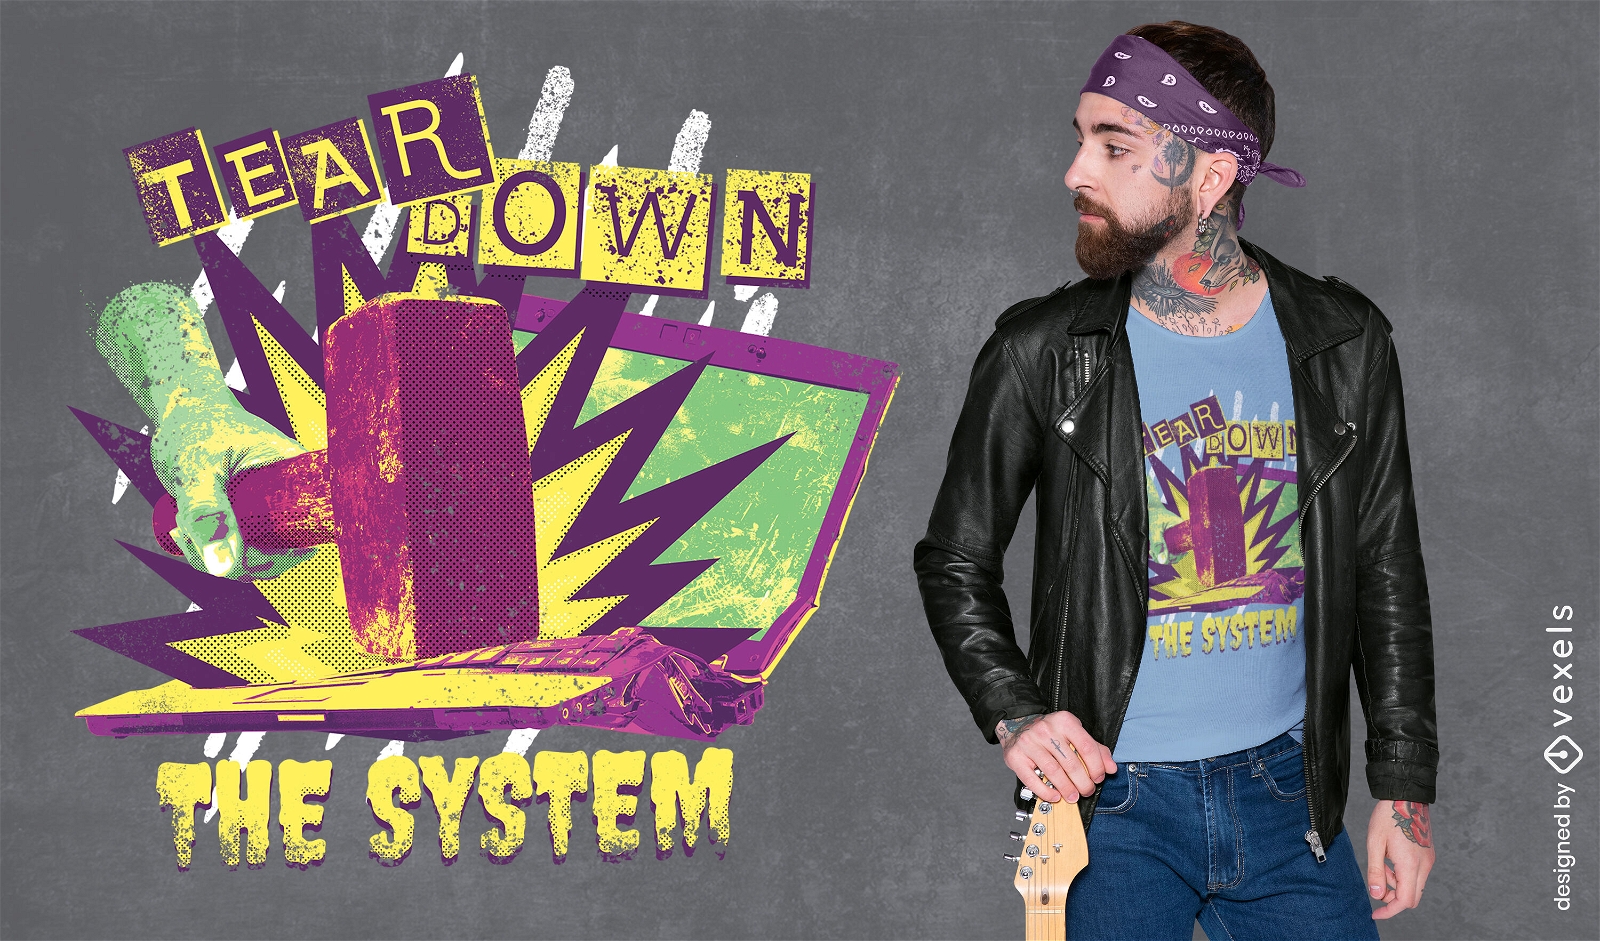 Tear down the system t-shirt design